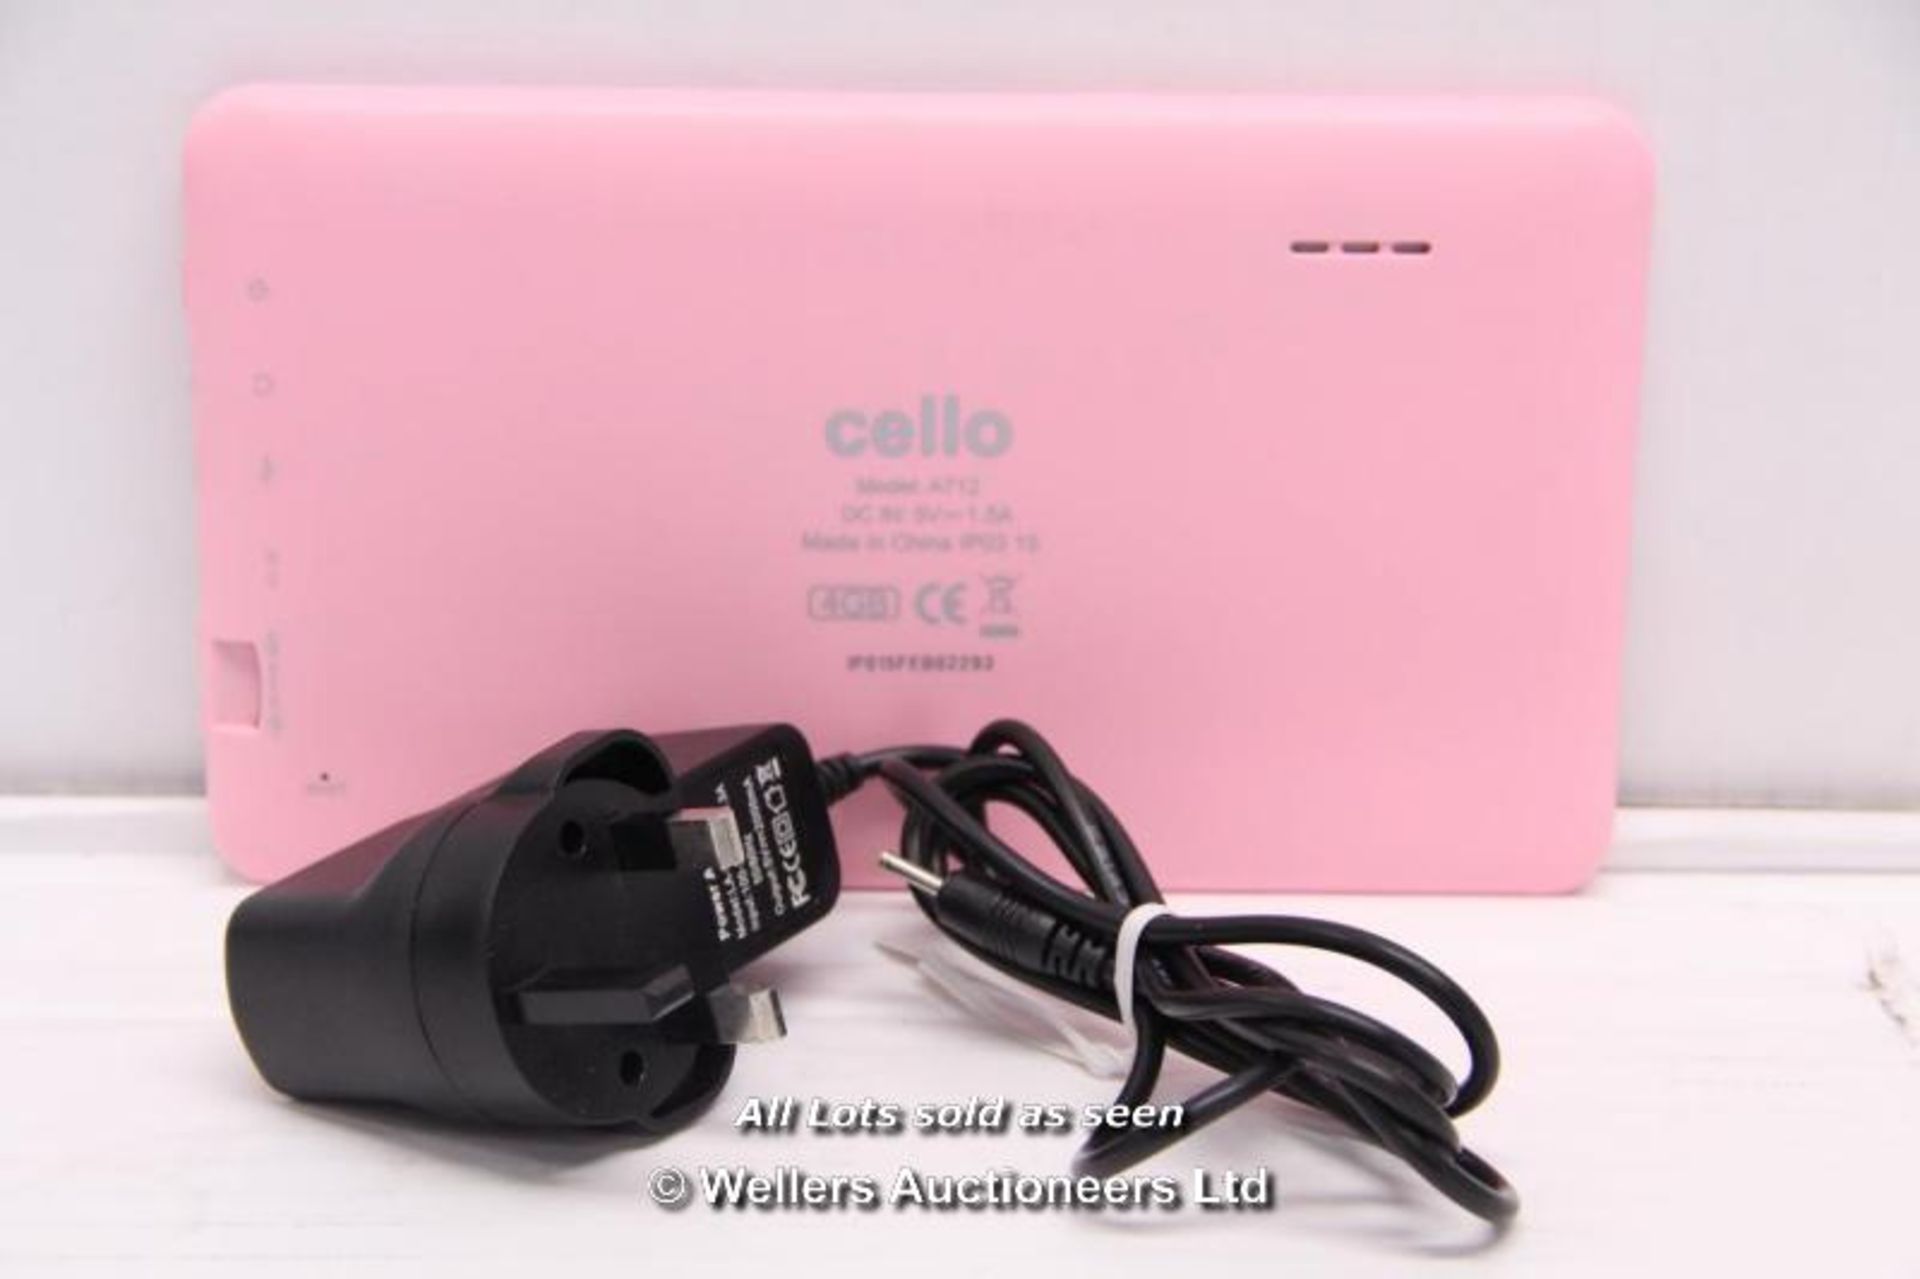 CELLO A712 PINK 7" TABLET / 4GB STORAGE / POWERS ON WITH ANDROID / INCLUDING CHARGER / SCRATCHES - Image 2 of 3